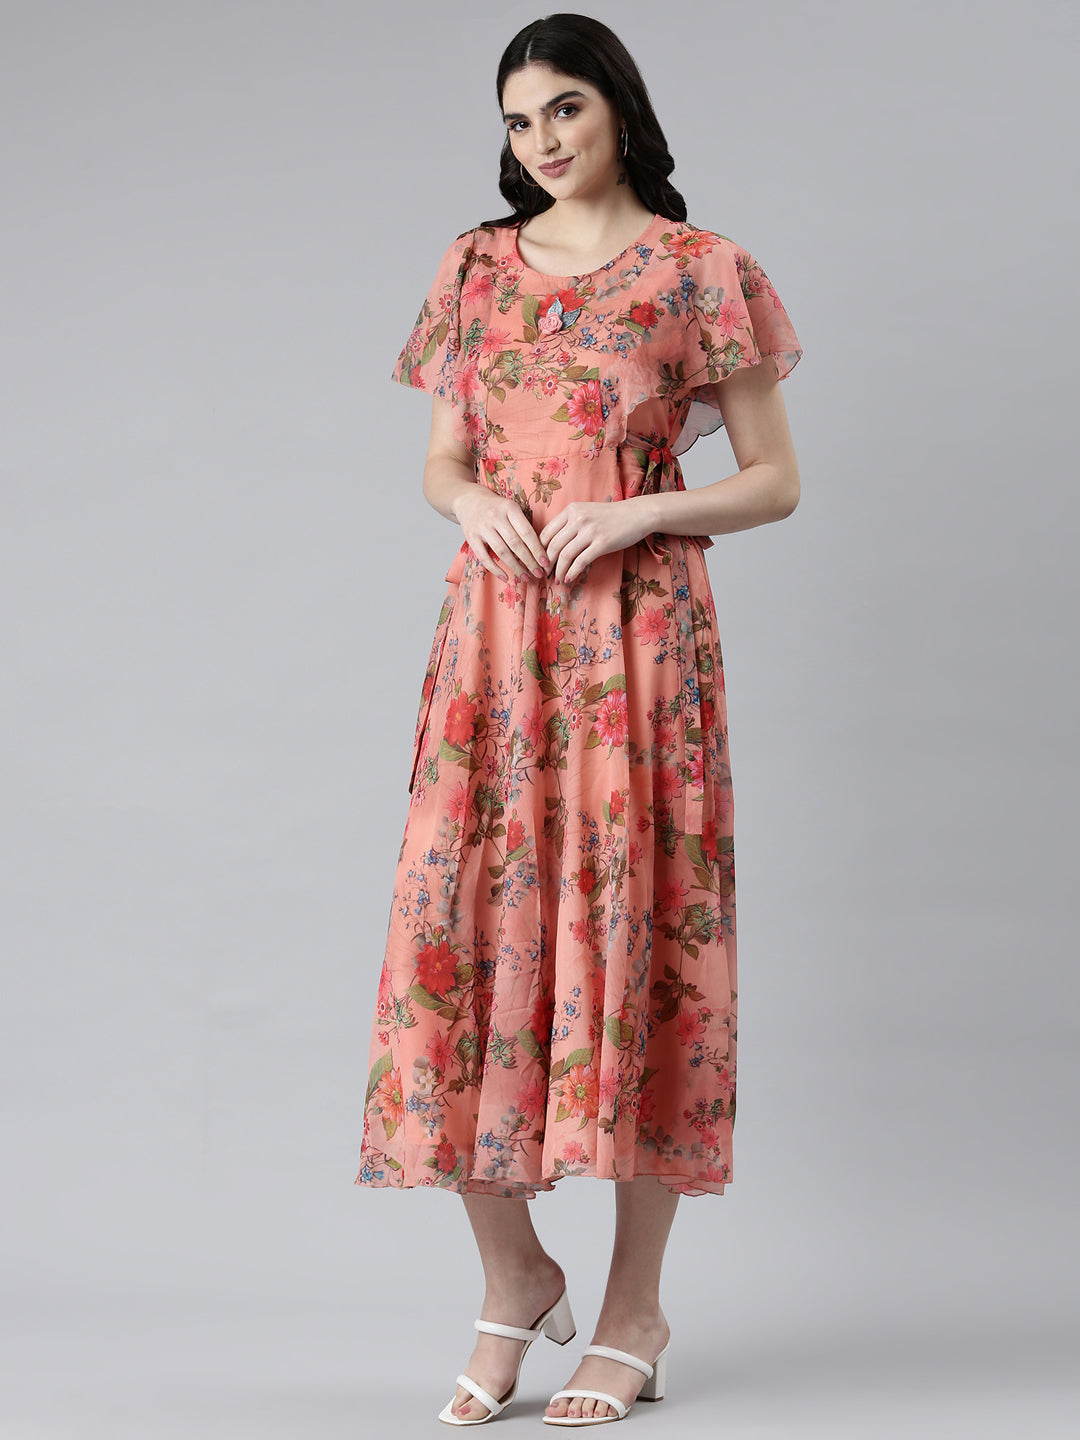 Women Orange Floral Fit and Flare Dress